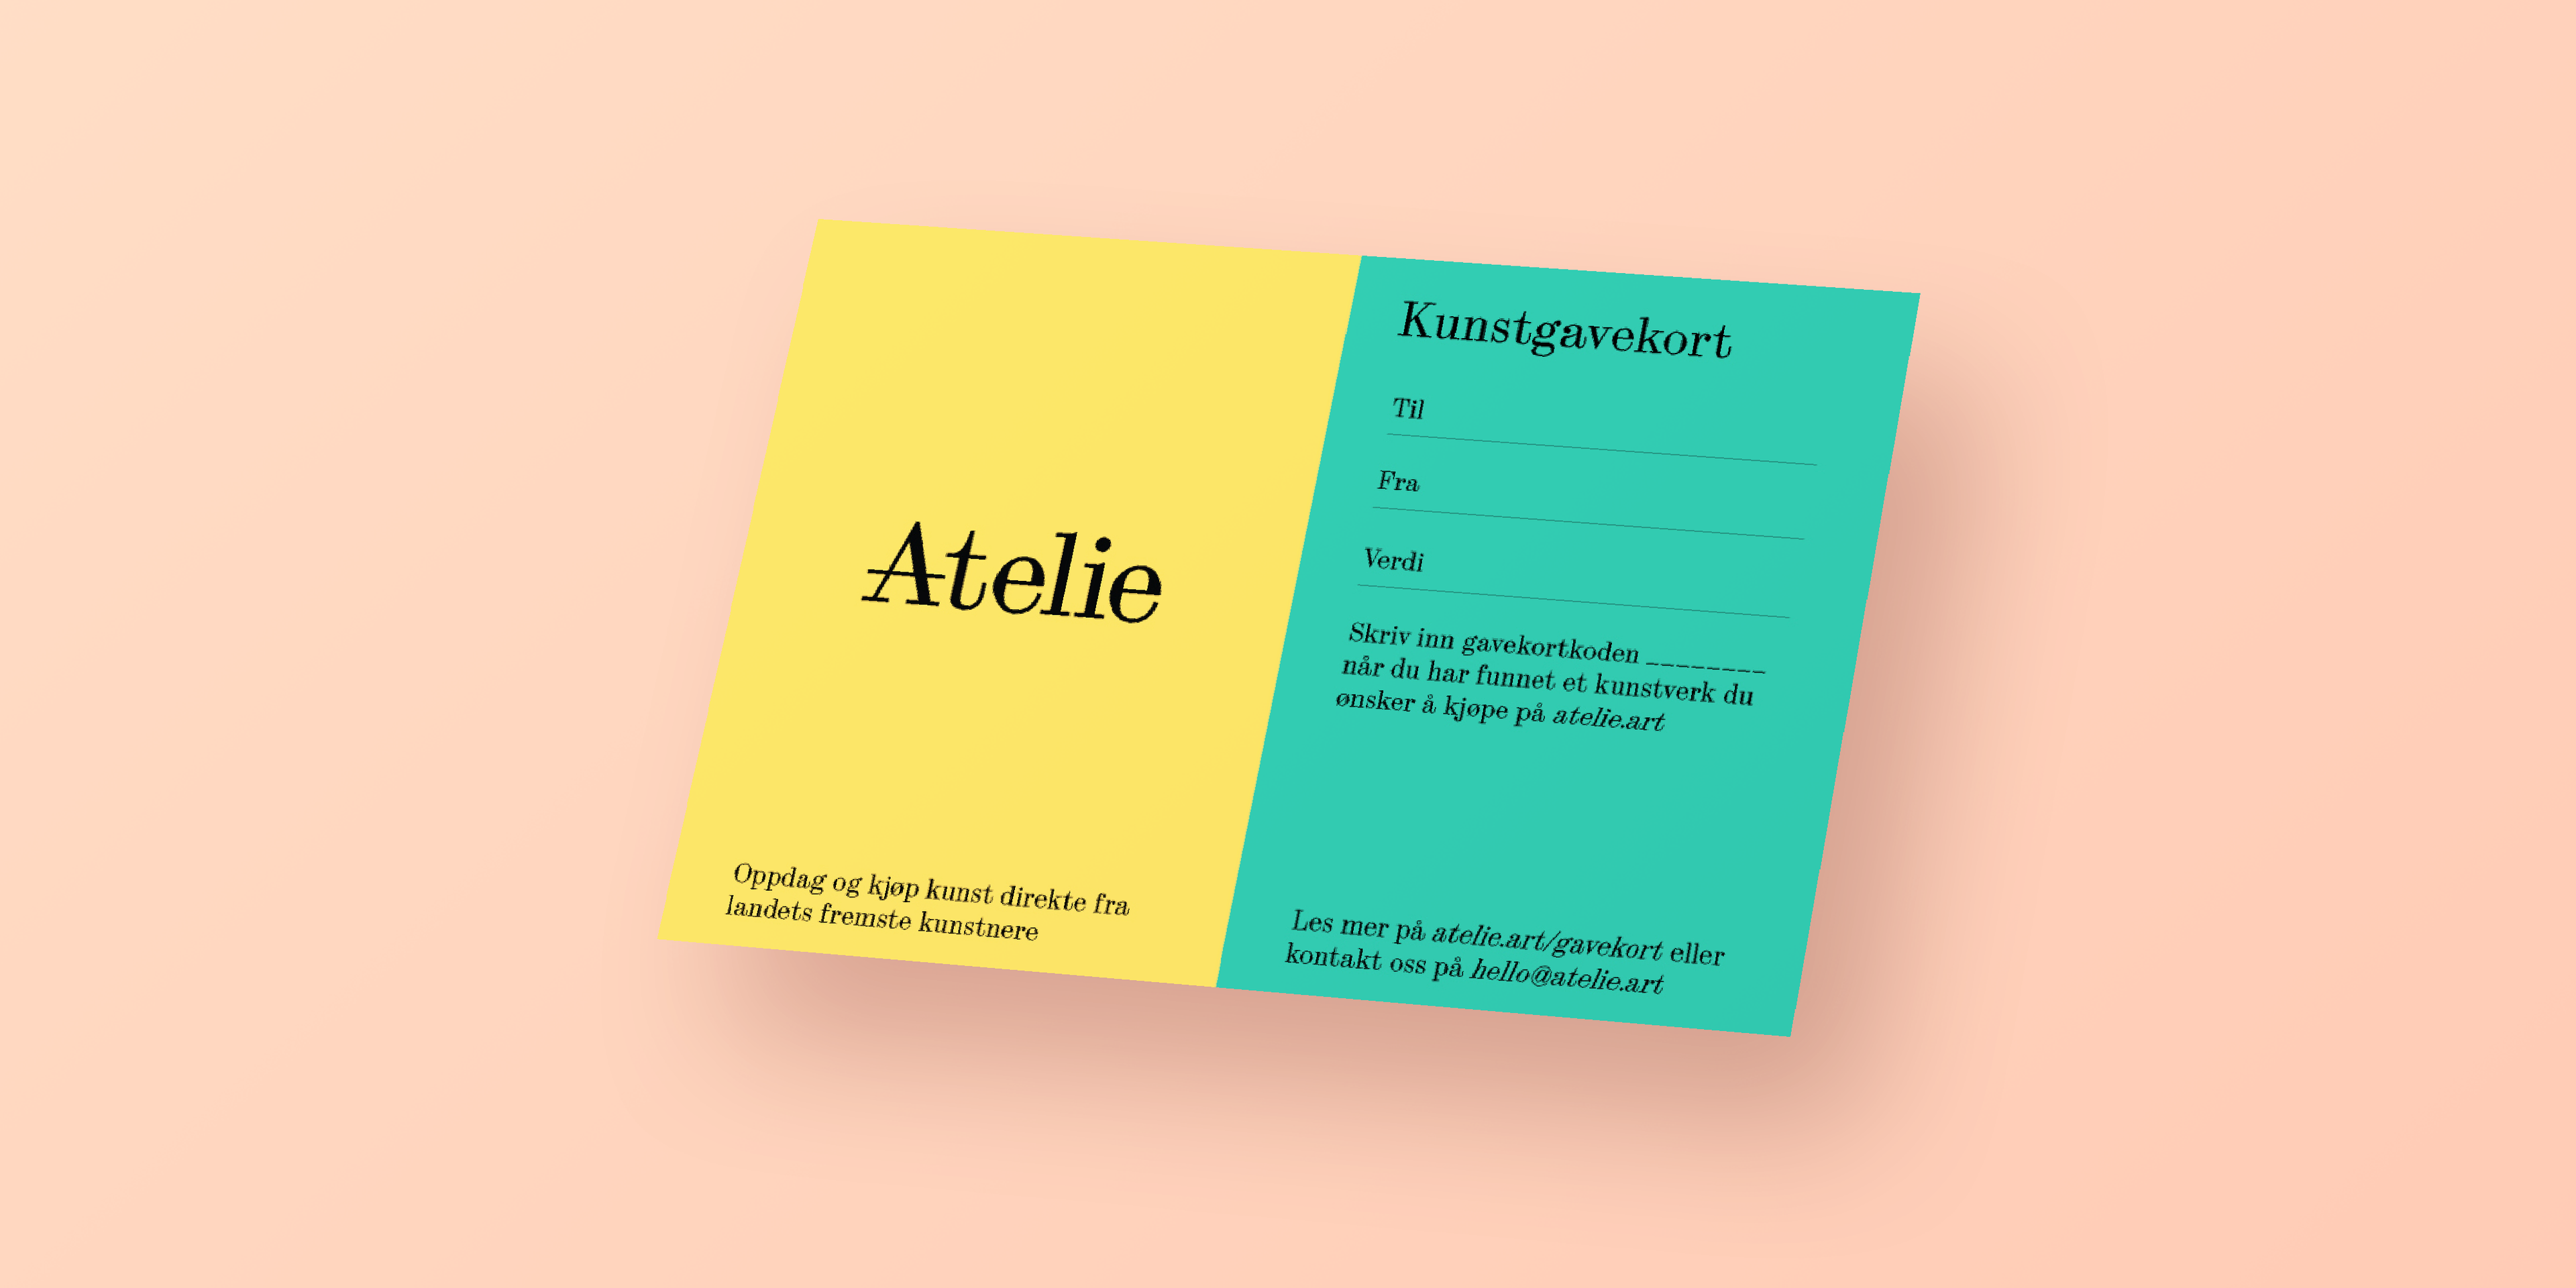 A gift card from Atelie is the perfect gift for those seeking something unique. With Atelie, you can purchase art directly from professional artists, while simultaneously supporting the local art community and enhancing the conditions for the creation of art.